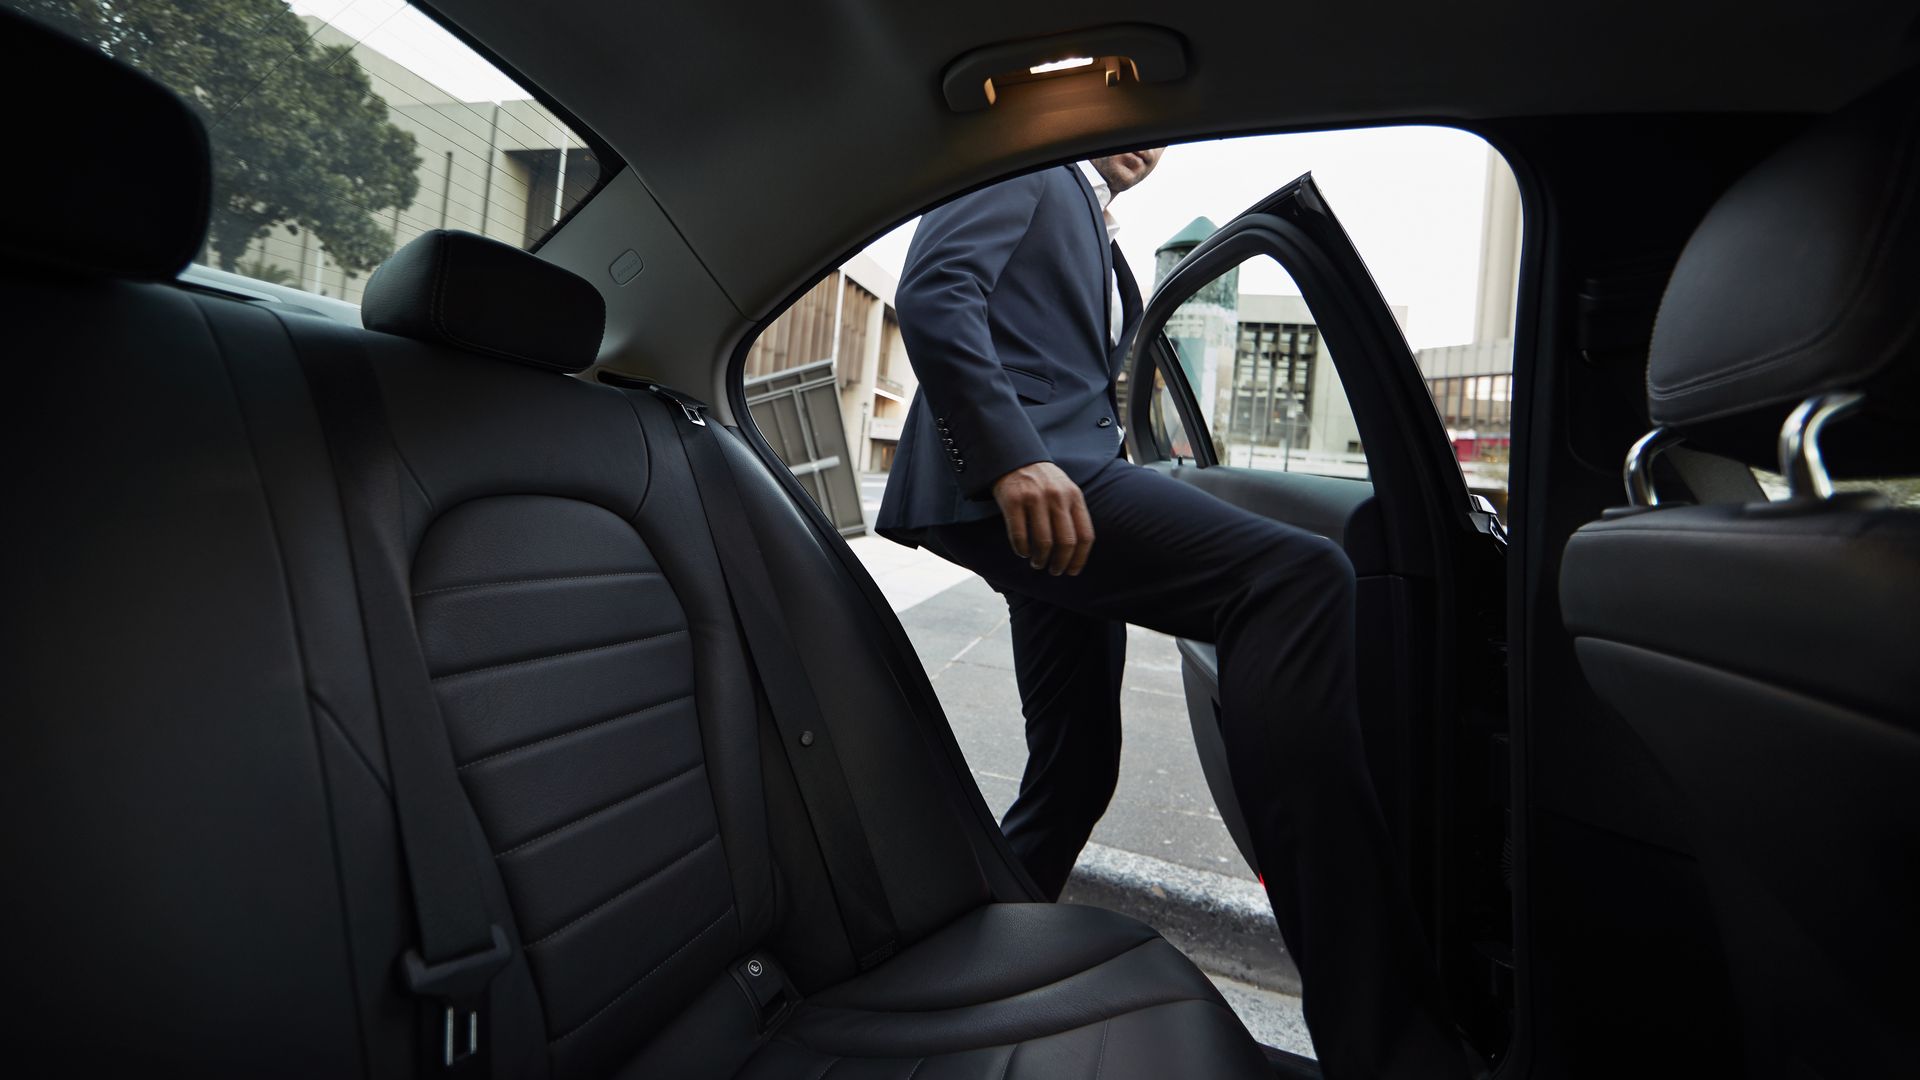 Businessman getting into backseat of a private cab.